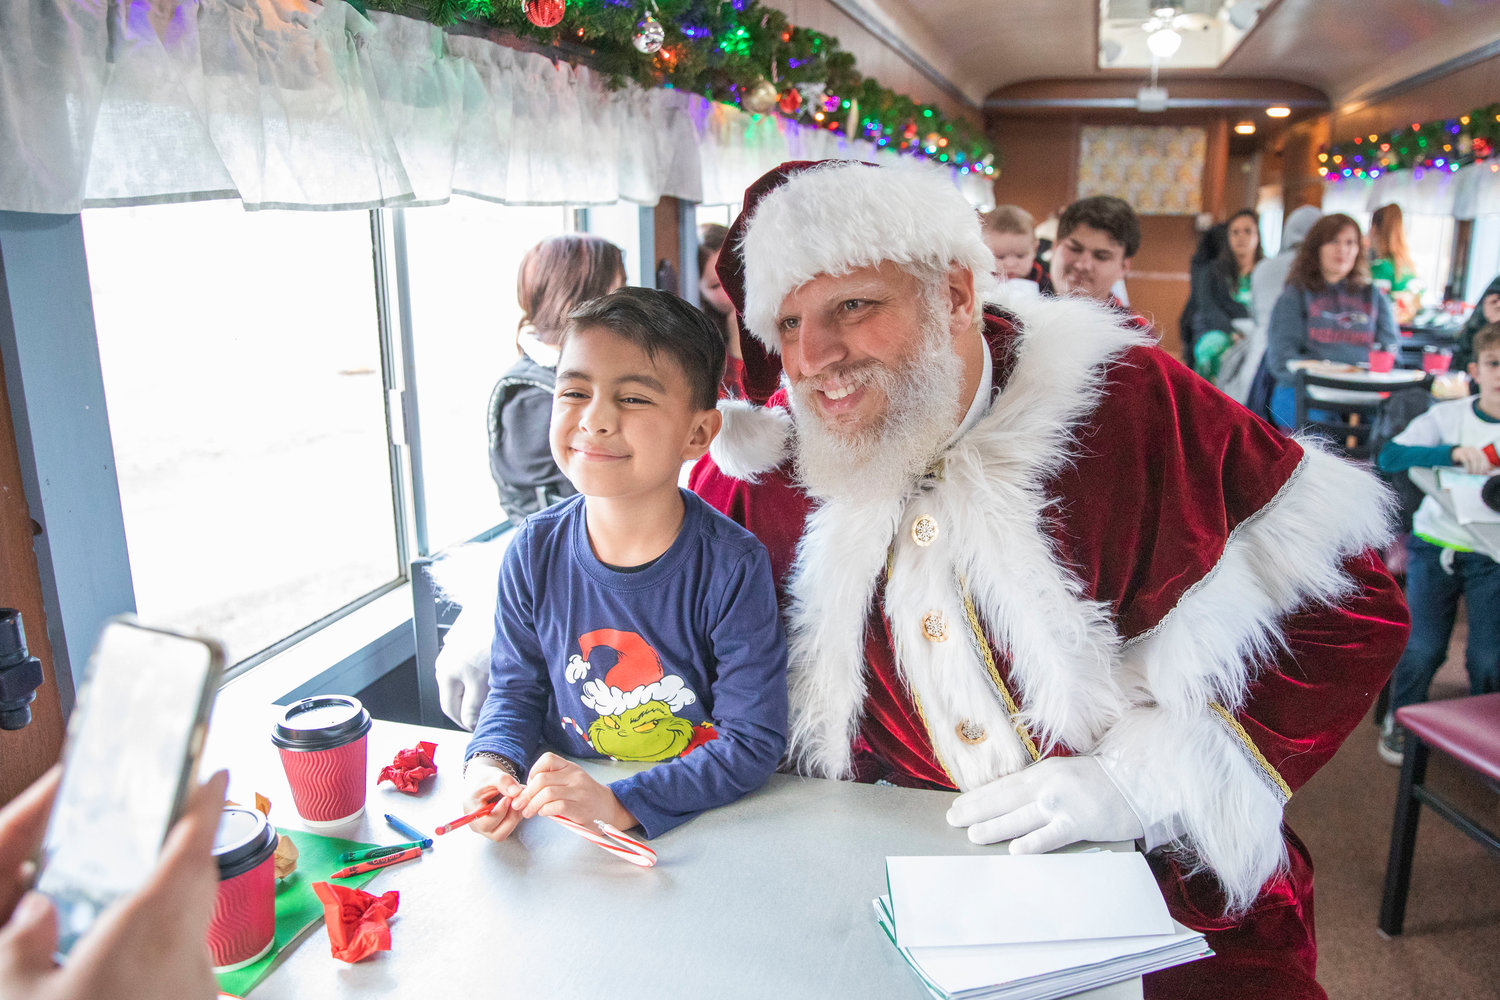 Pictures are taken as Santa visits kids at the Steam Train Depot in Chehalis on Saturday.